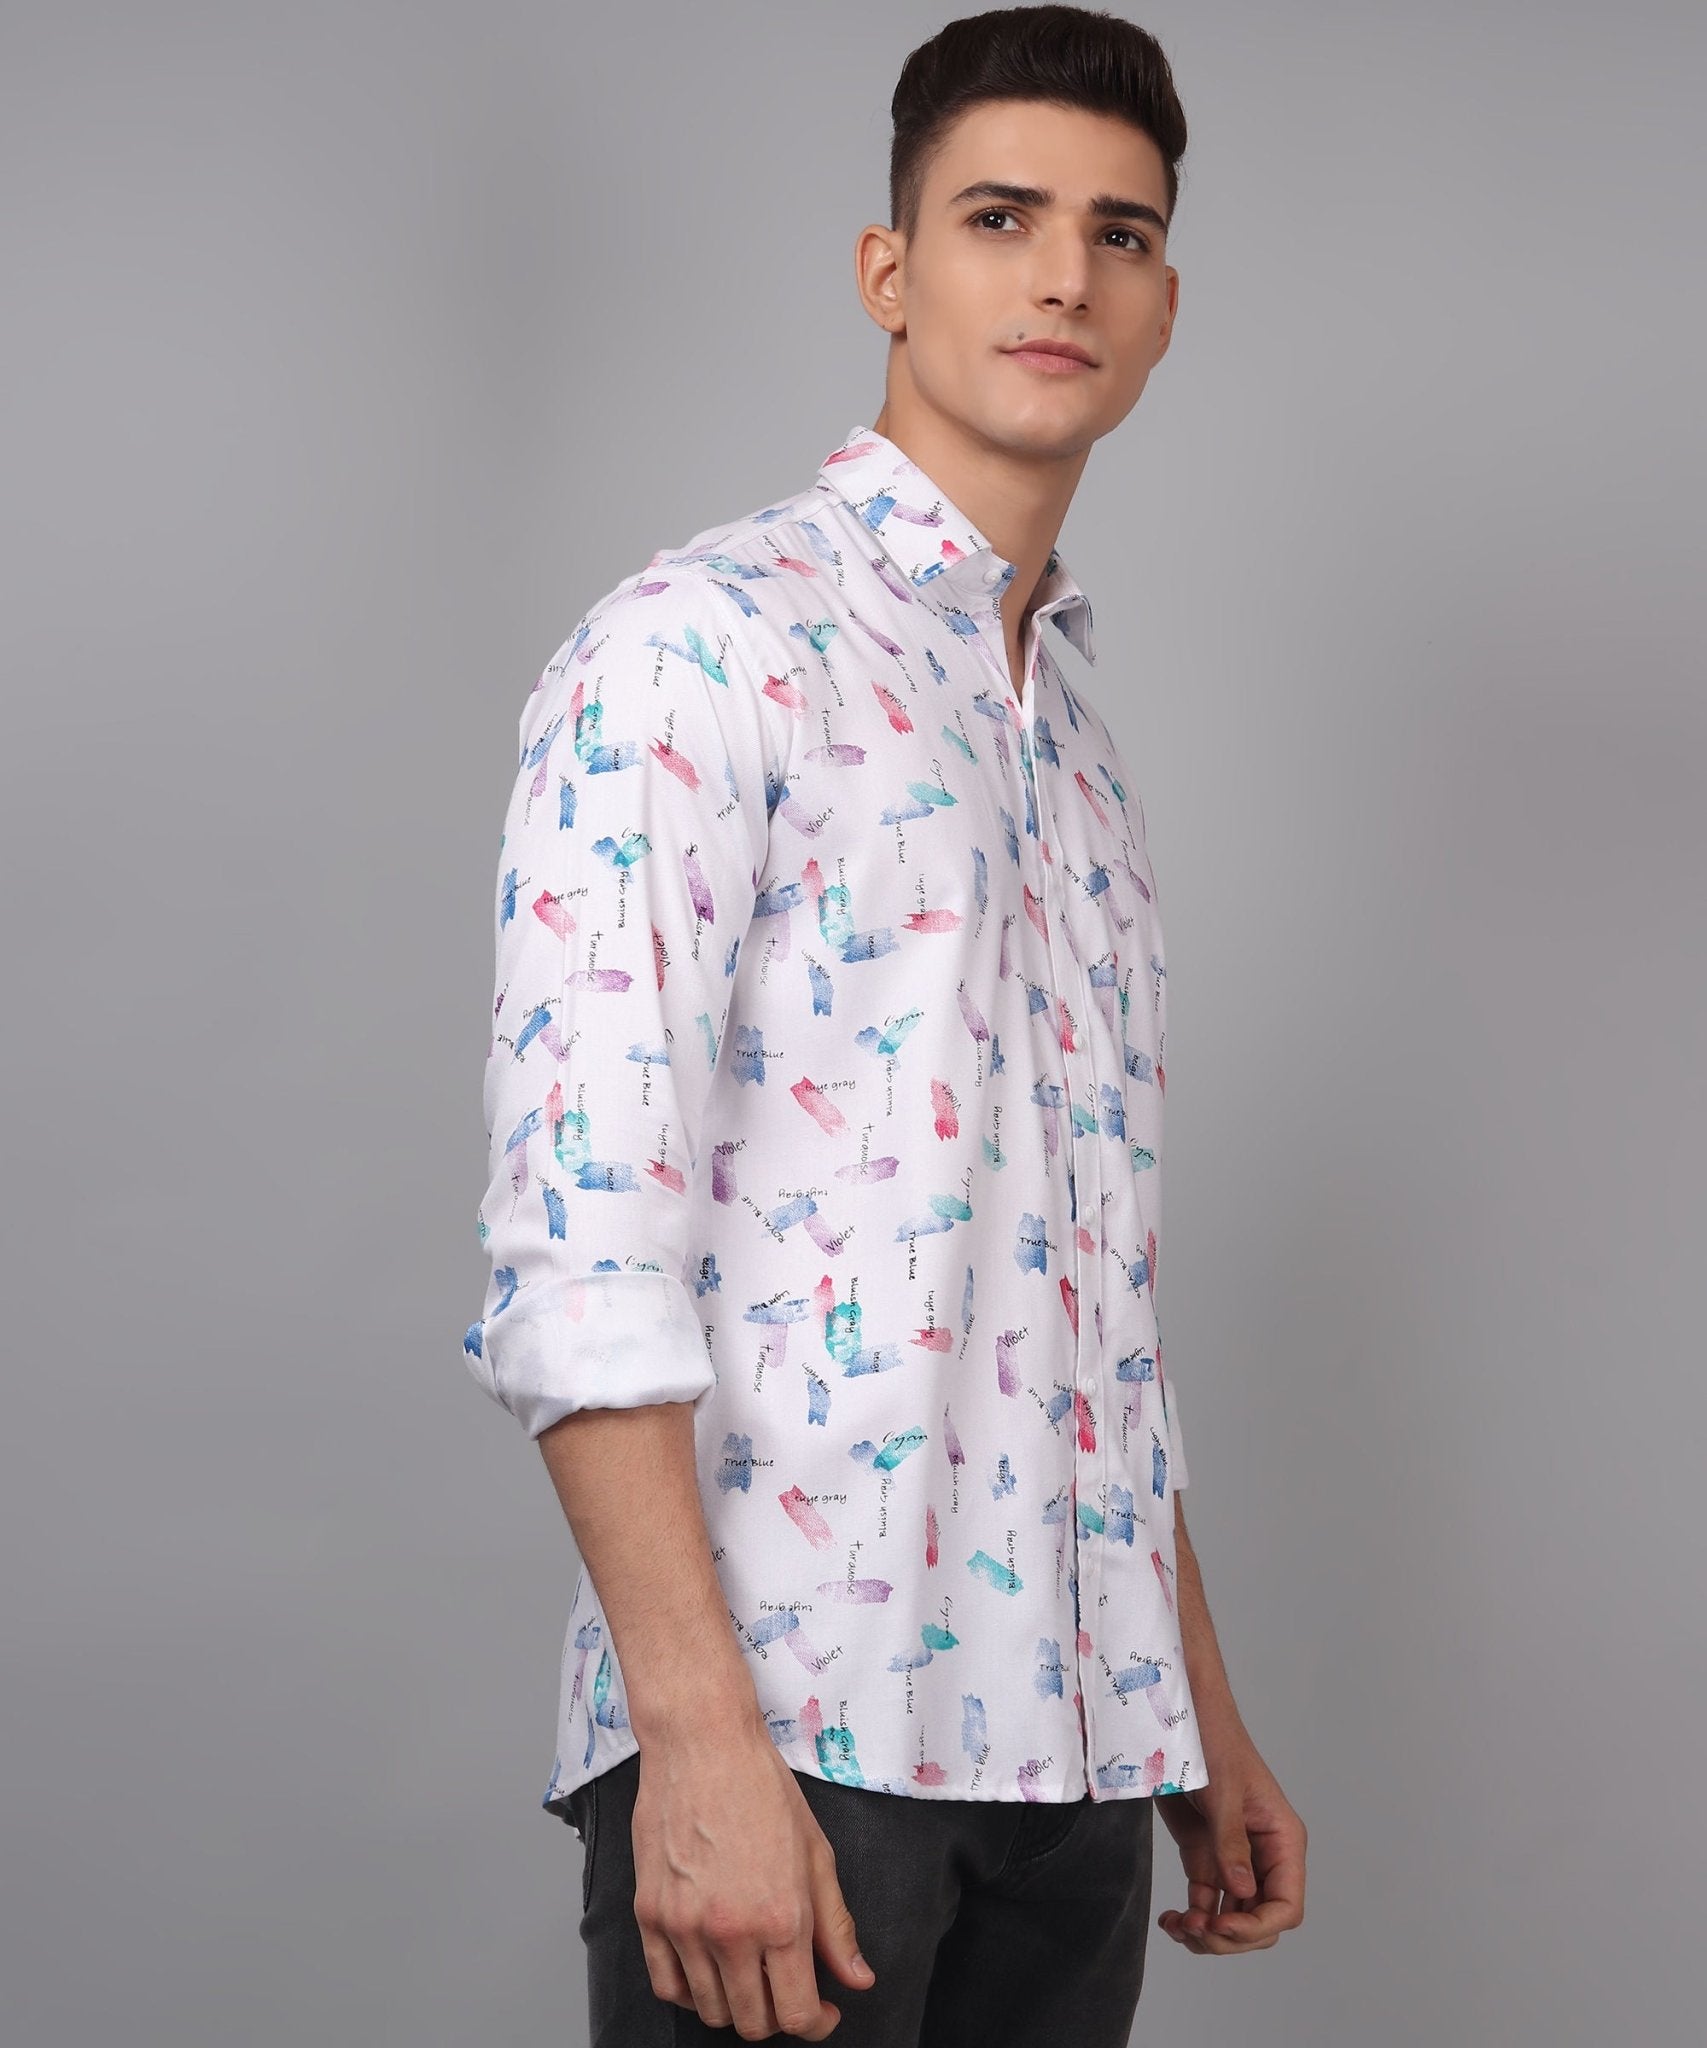 Trybuy Premium Glamorous Printed Multi Colored Cotton Casual Shirt for Men - TryBuy® USA🇺🇸